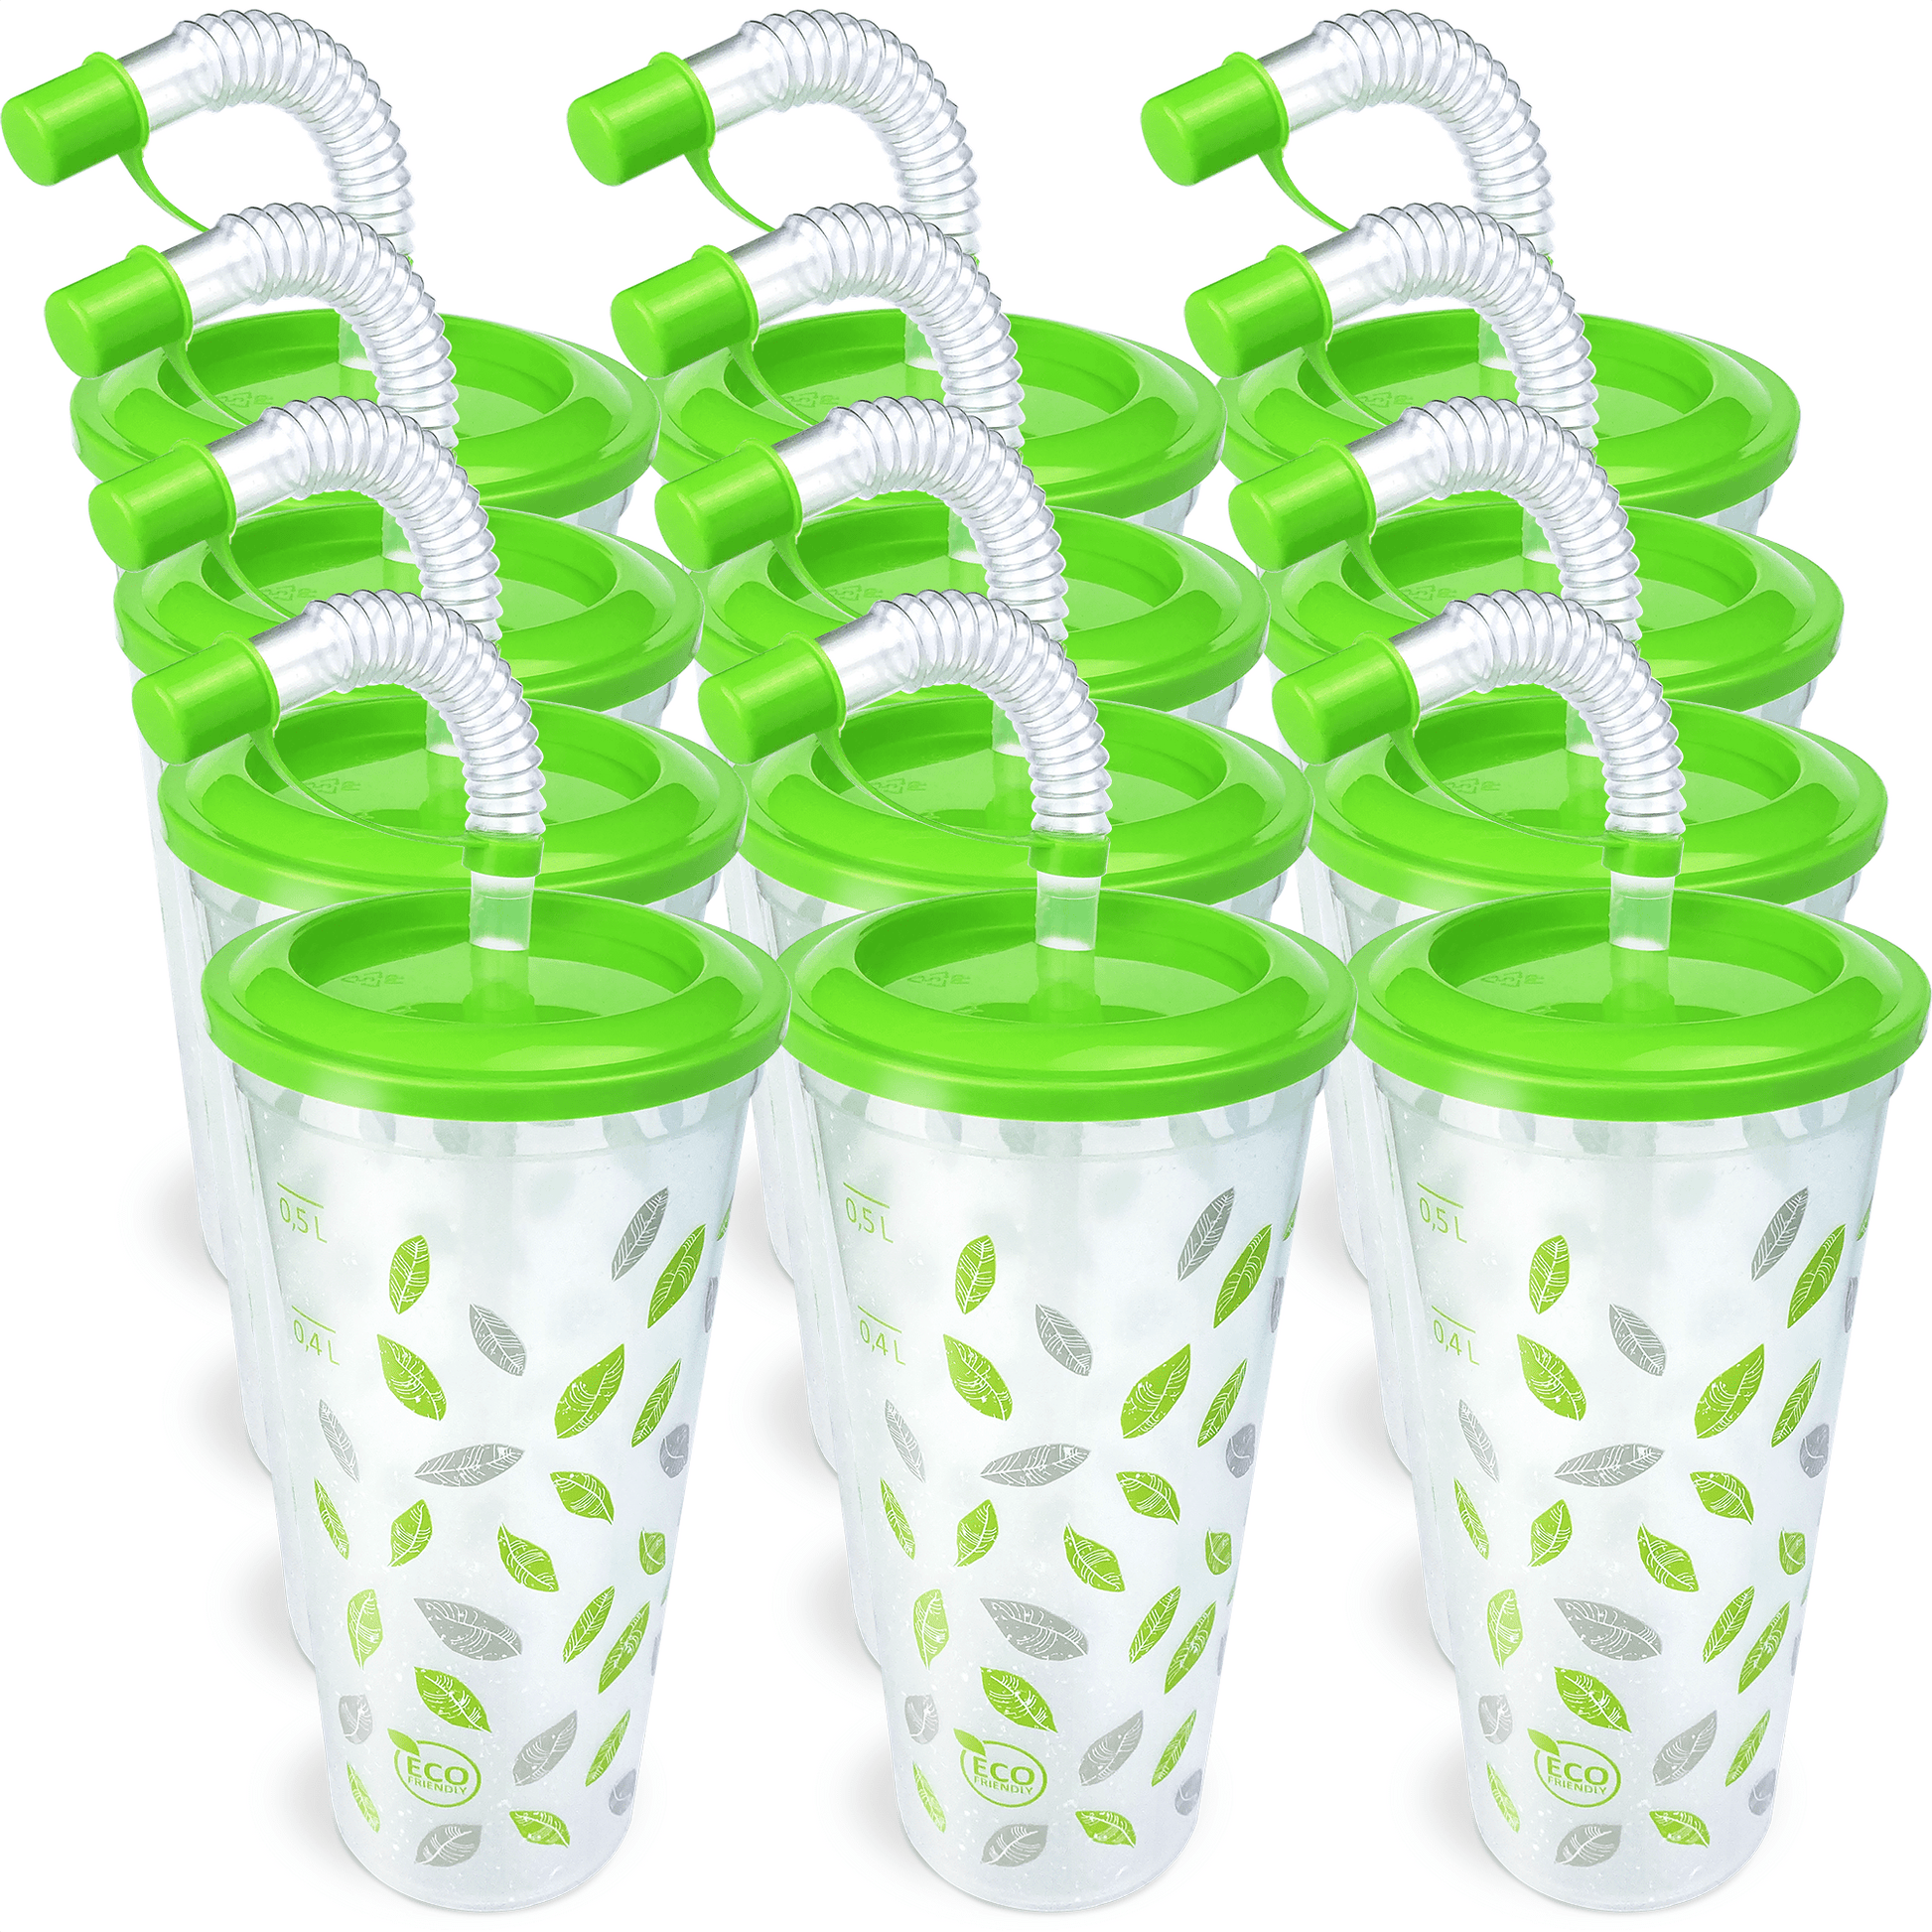 Sweet World USA Tumbler Cups Green Tumbler Cups Party Pack (100 cups) - (17oz./500ml.) cups with lids and straws